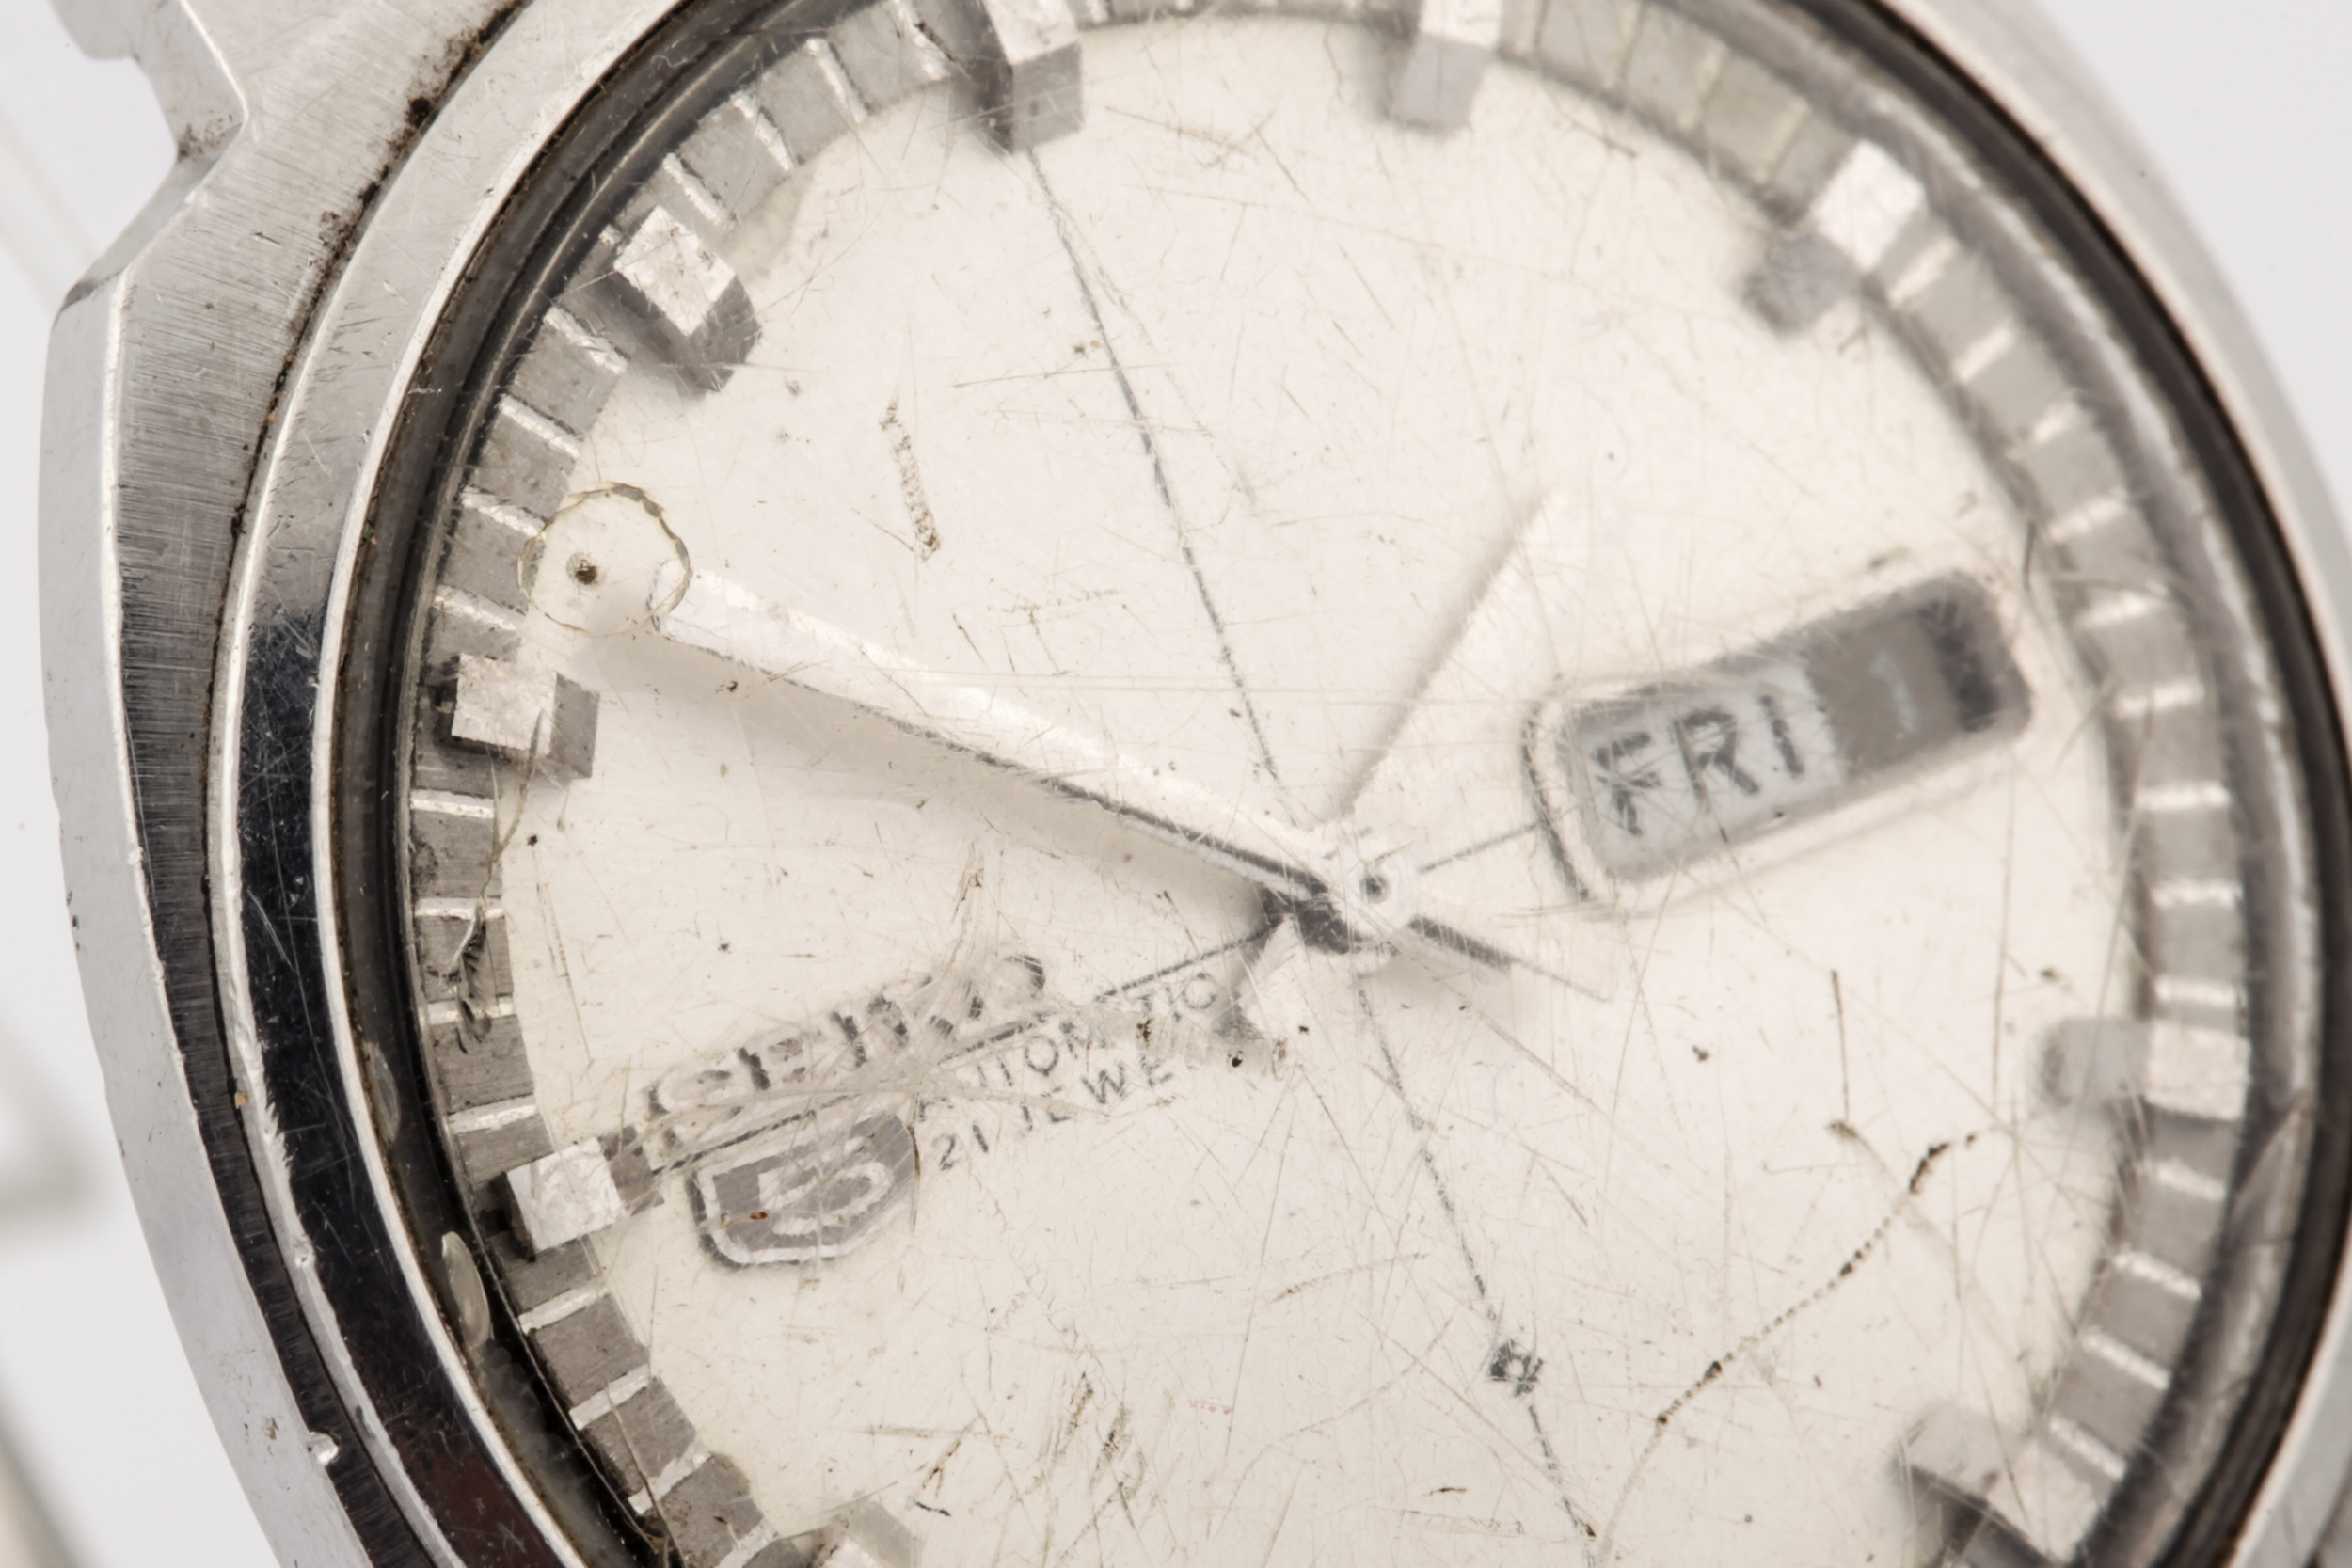 Seiko, 5, a gentleman's stainless steel automatic chronograph bracelet watch. - Image 2 of 6